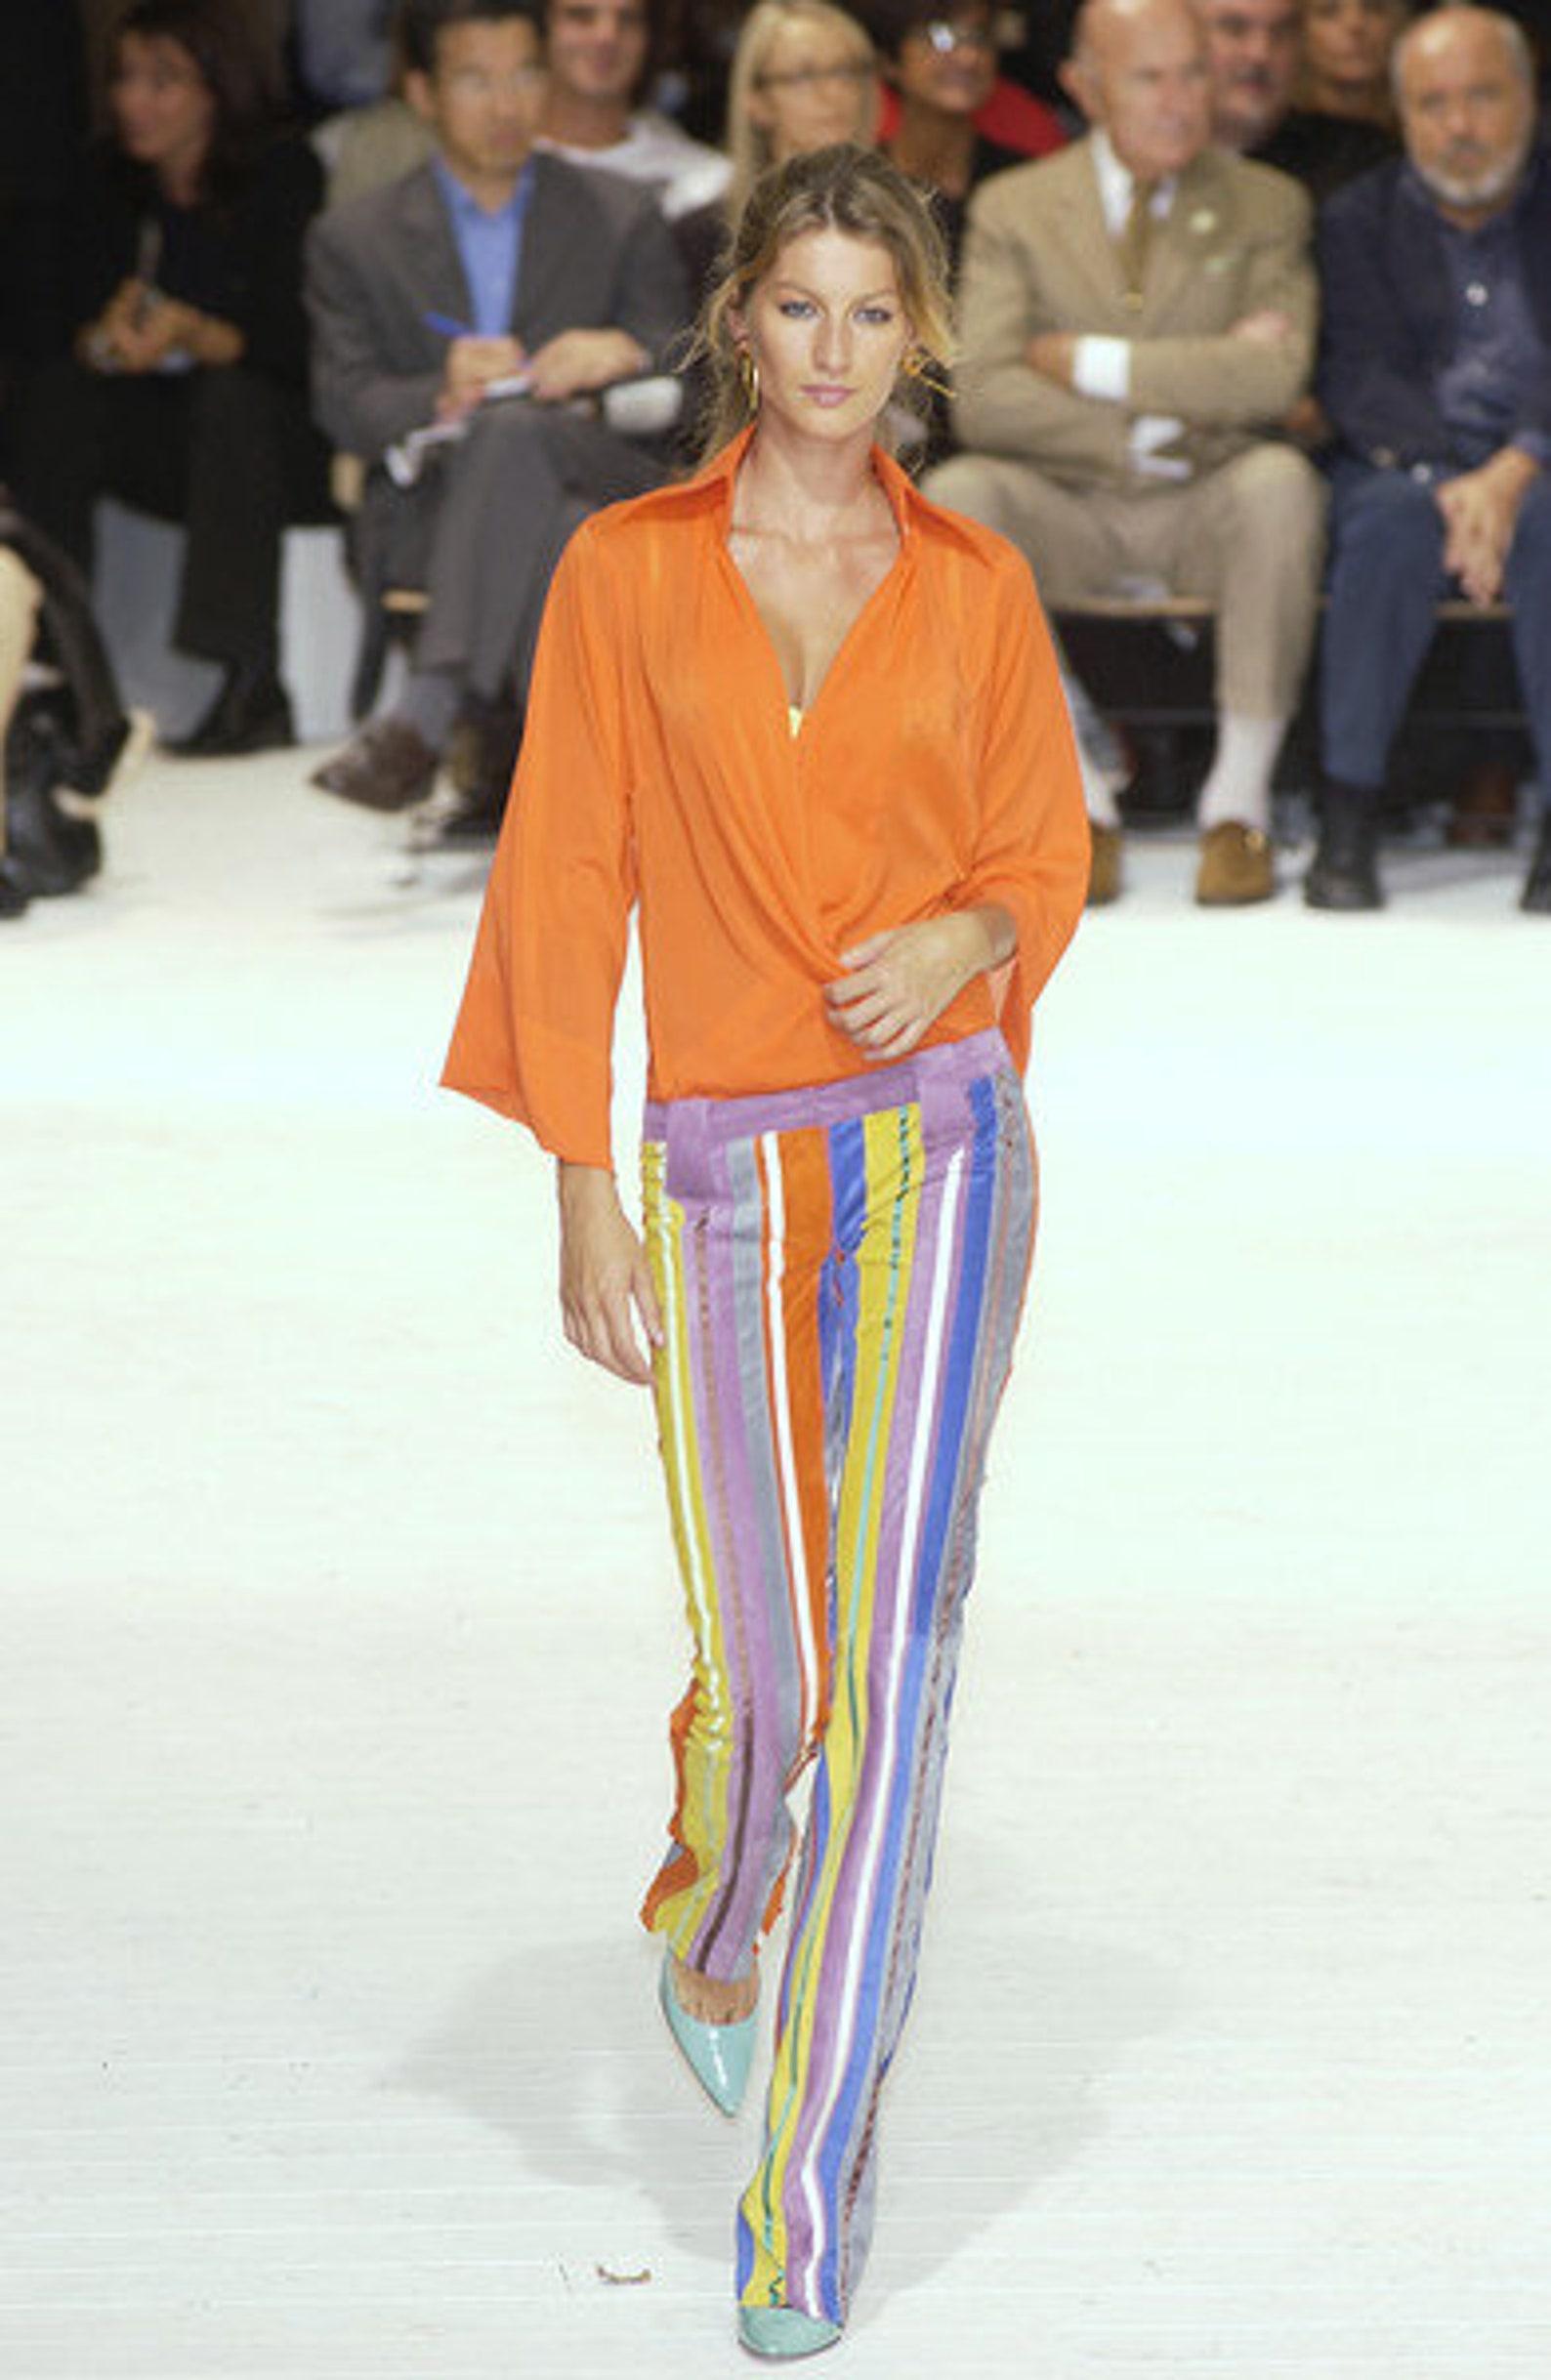 Dolce & Gabbana spring/summer 2002 documented rainbow striped patchwork suede leather mid rise bootcut trousers boho style (IT40)
Rare and collectible from Dolce & Gabbana spring/summer 2002 runway show, worn by Giselle Bündchen
Zipper and button